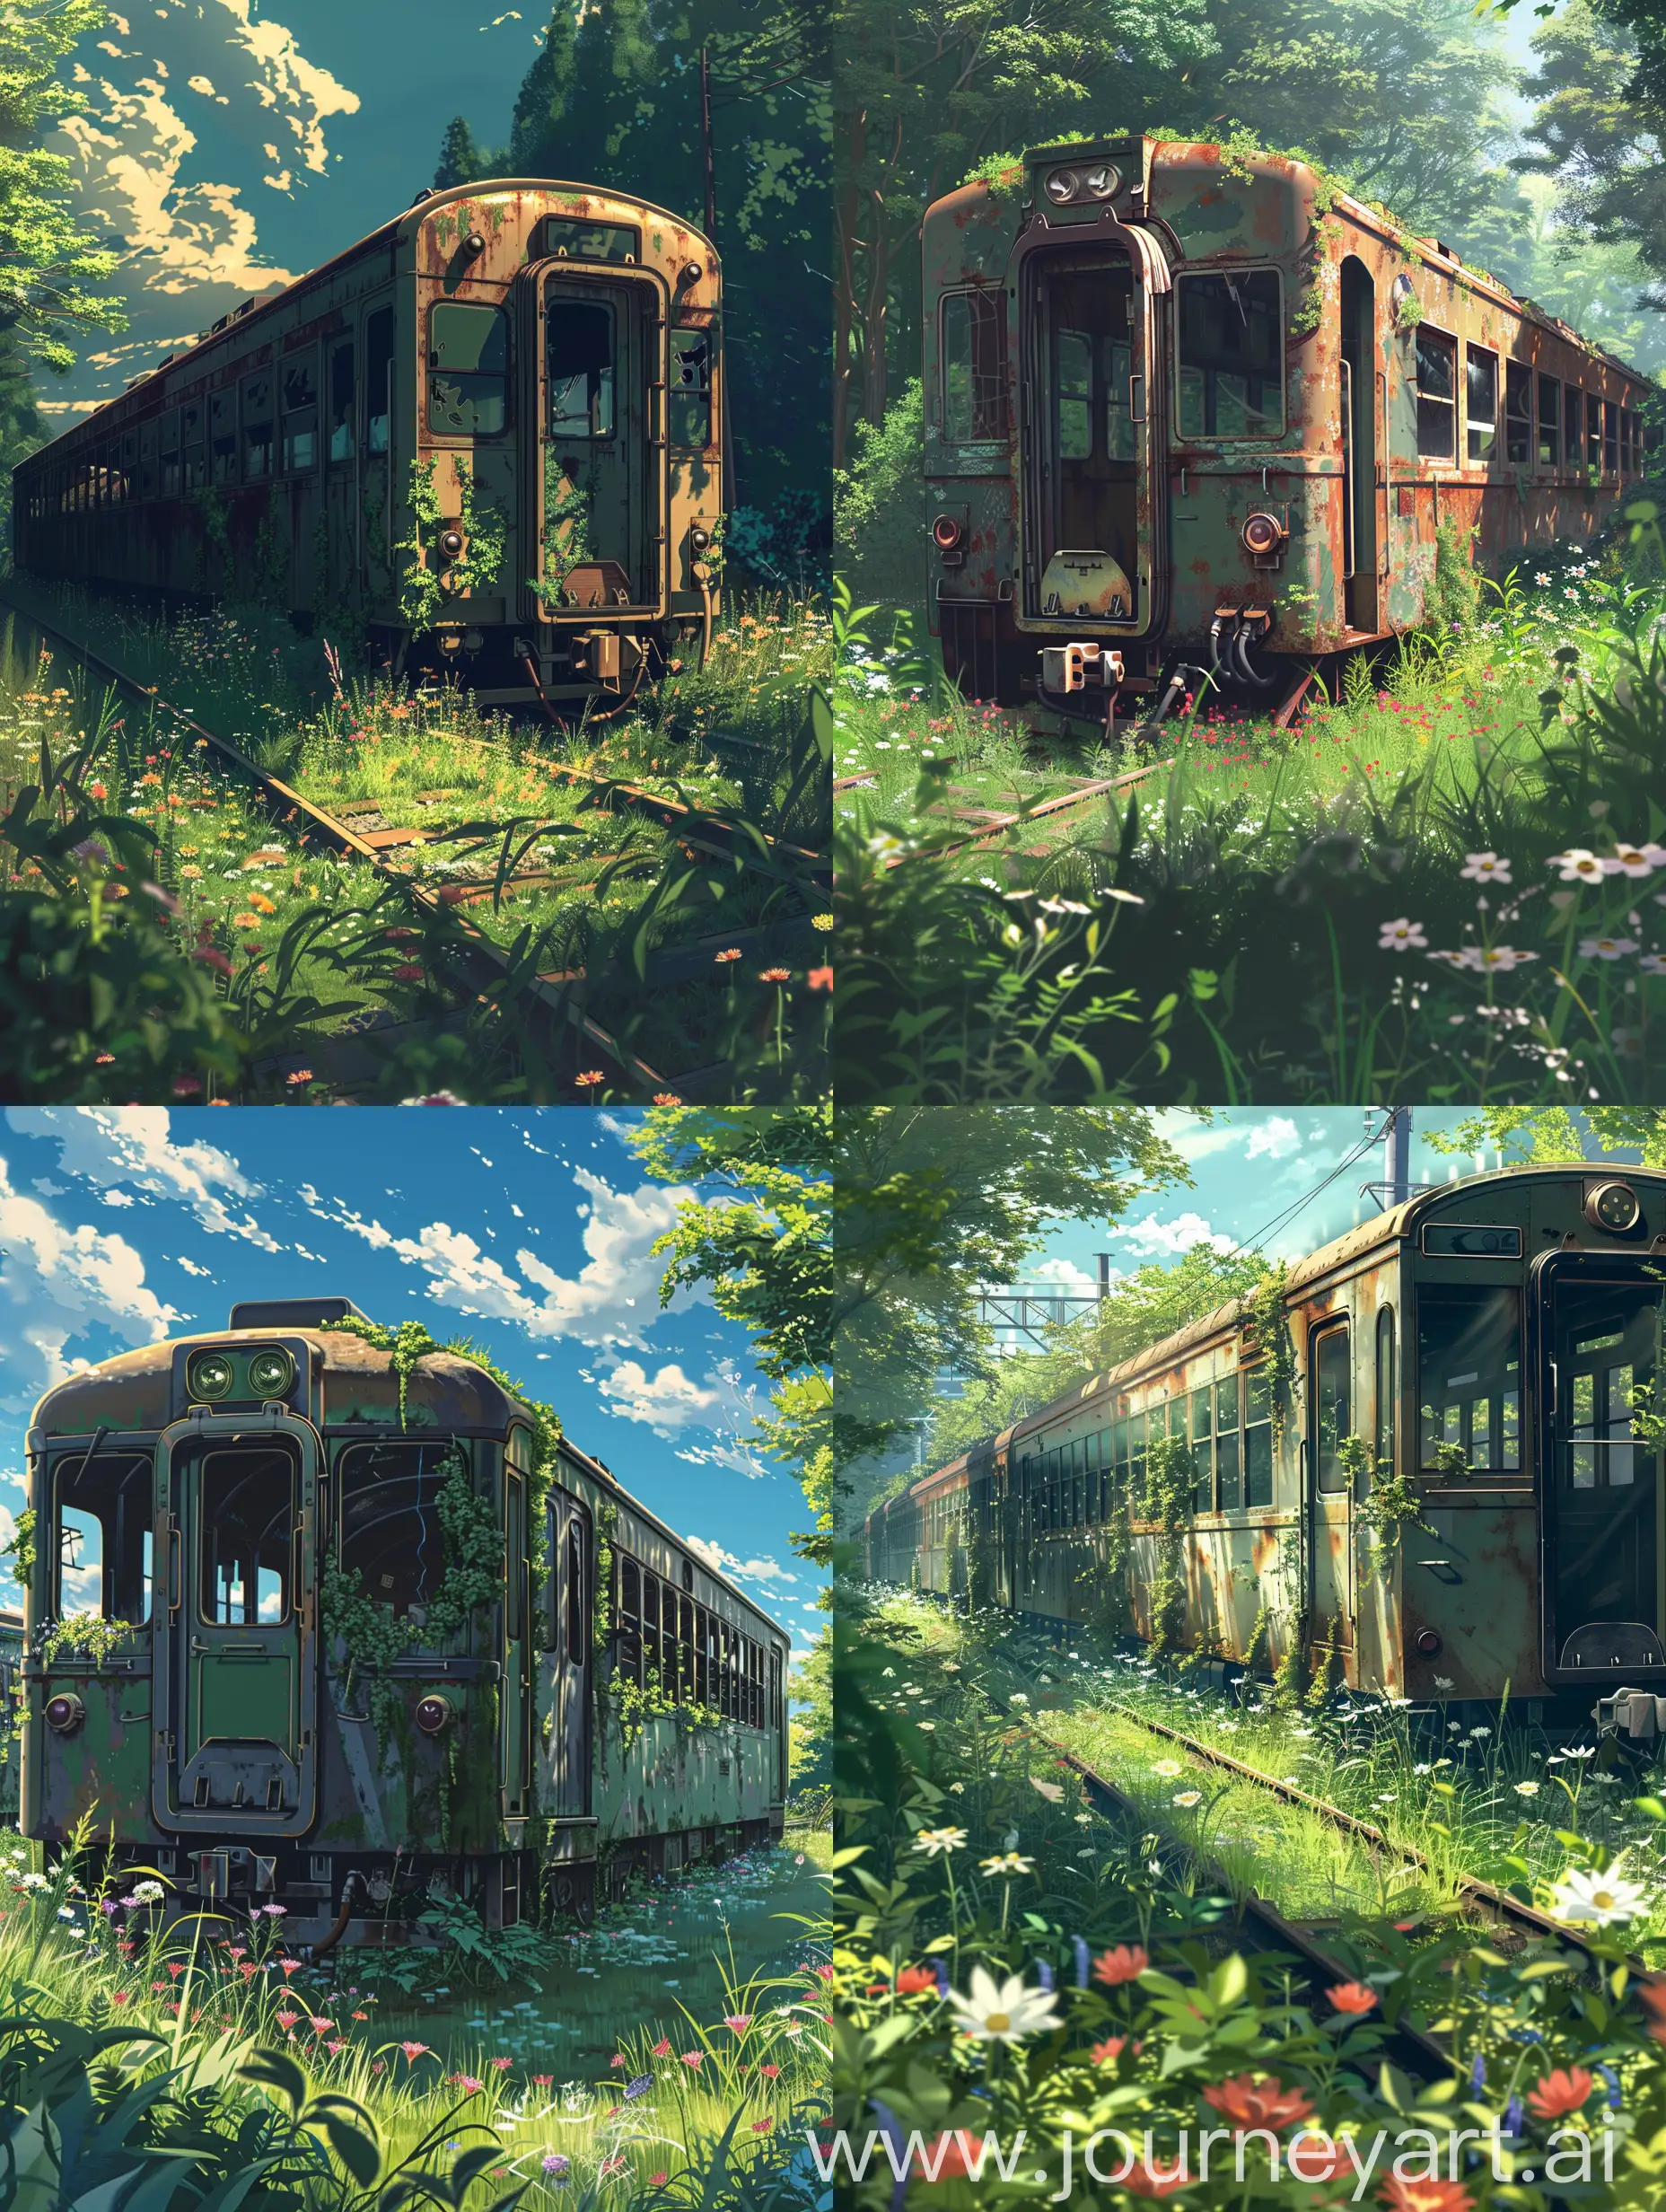 anime style, An old abandoned train carriage surrounded by grass and flowers.